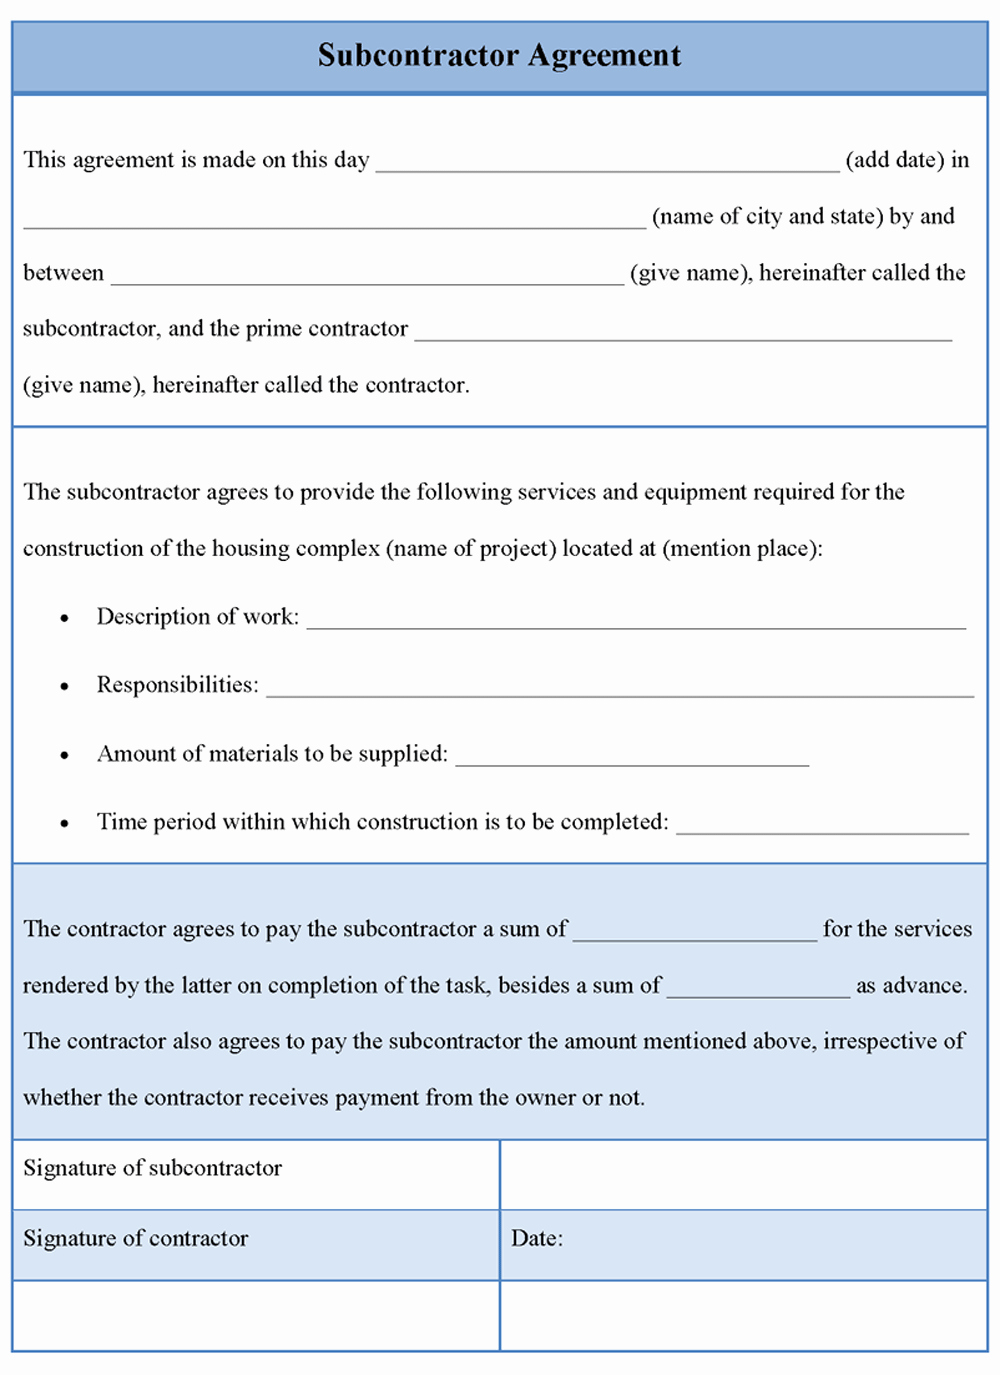 Free Subcontractor Agreement Template Inspirational Agreement Template for Subcontractor Template Of